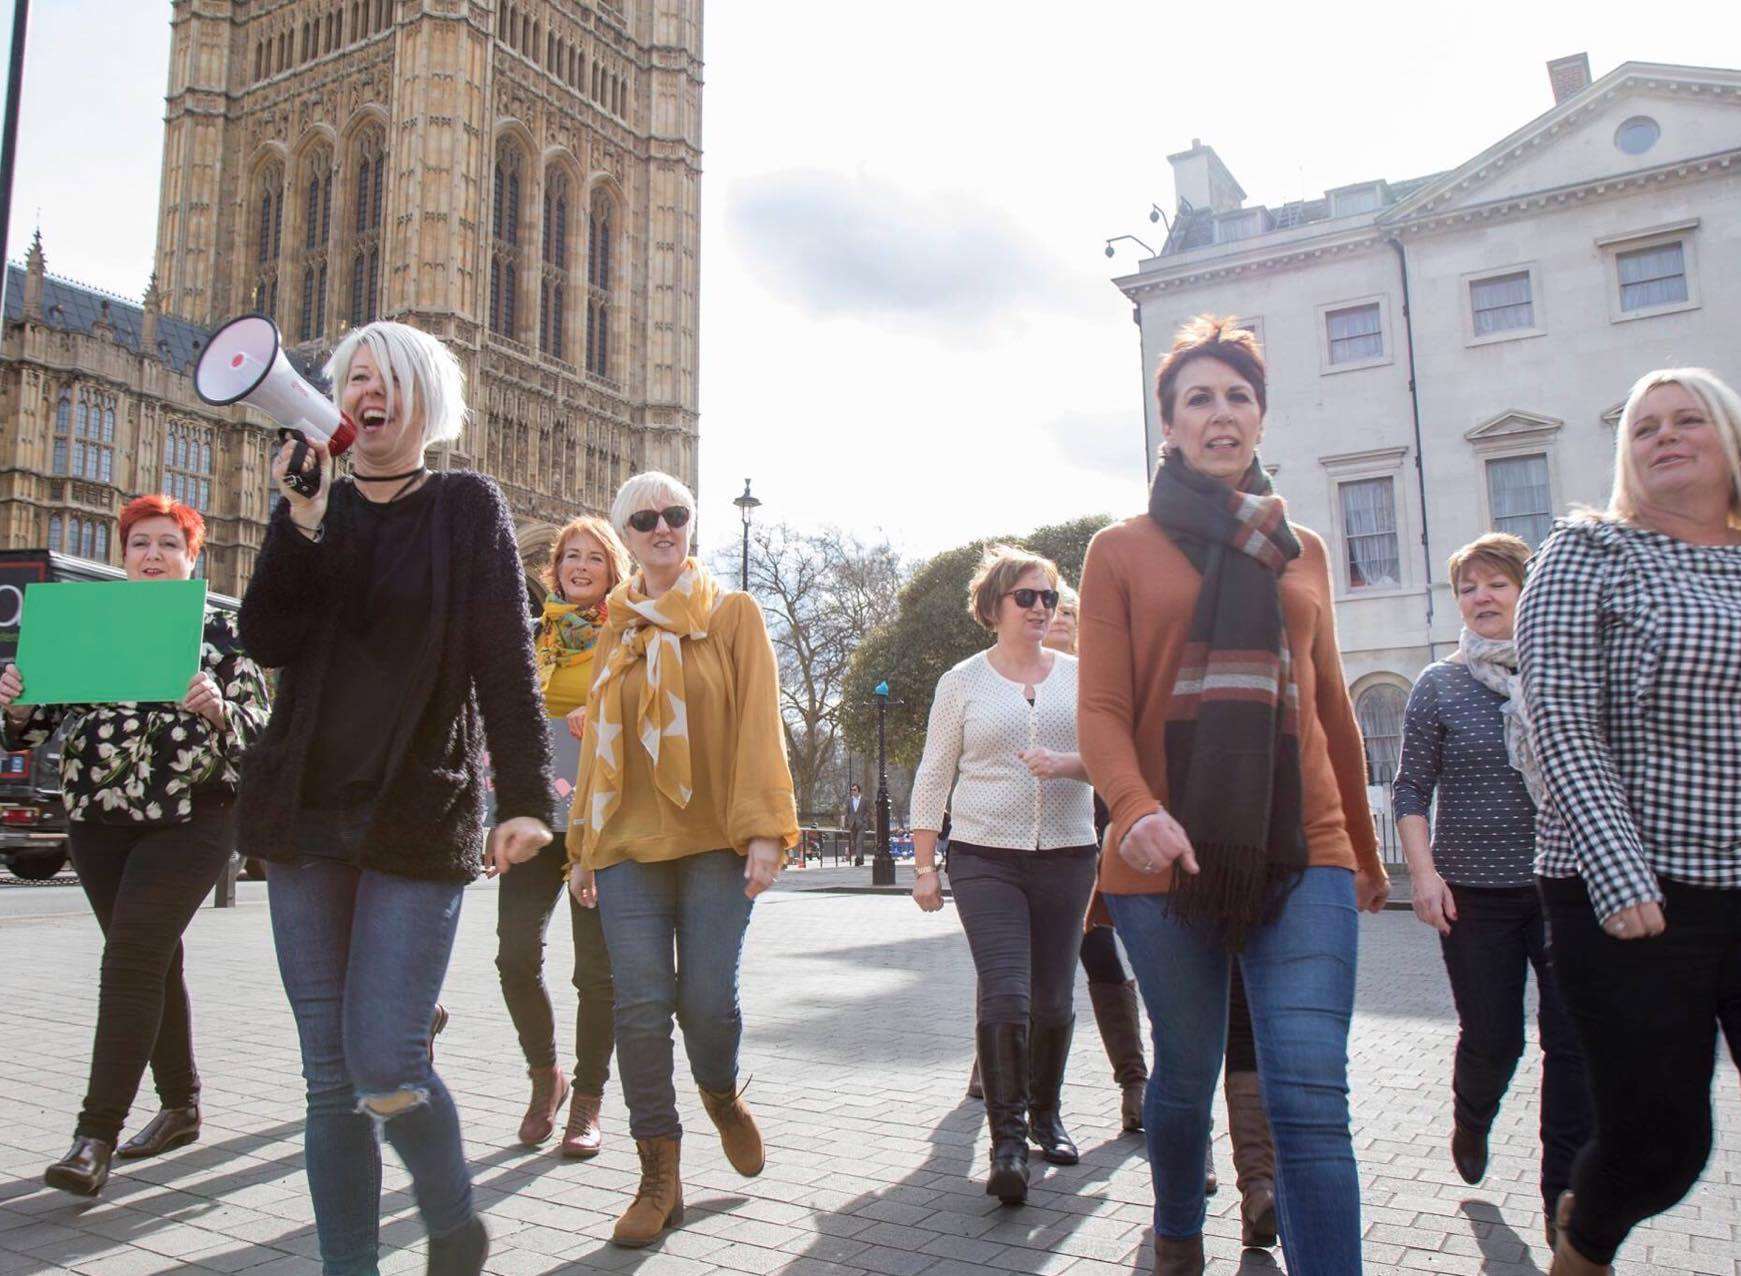 The shoot took place outside of the Houses of Parliament. Picture: Mark Sydserff/Breast Cancer Now